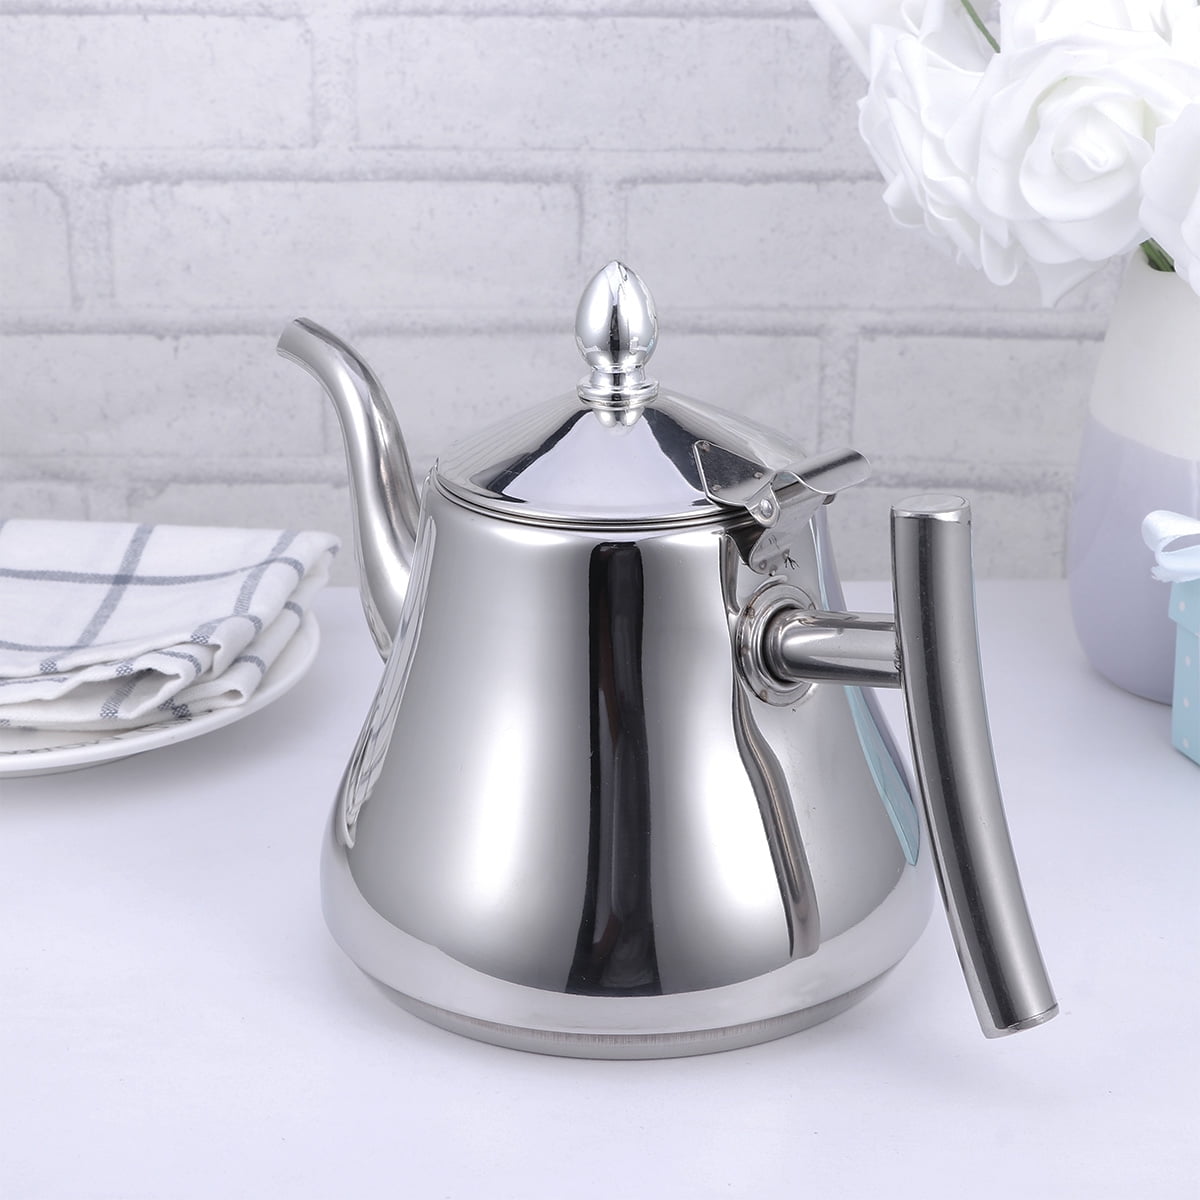 HG (1L)Stainless Steel Teapot Nontoxic Tea Pot Kettle With Filter For  Brewing